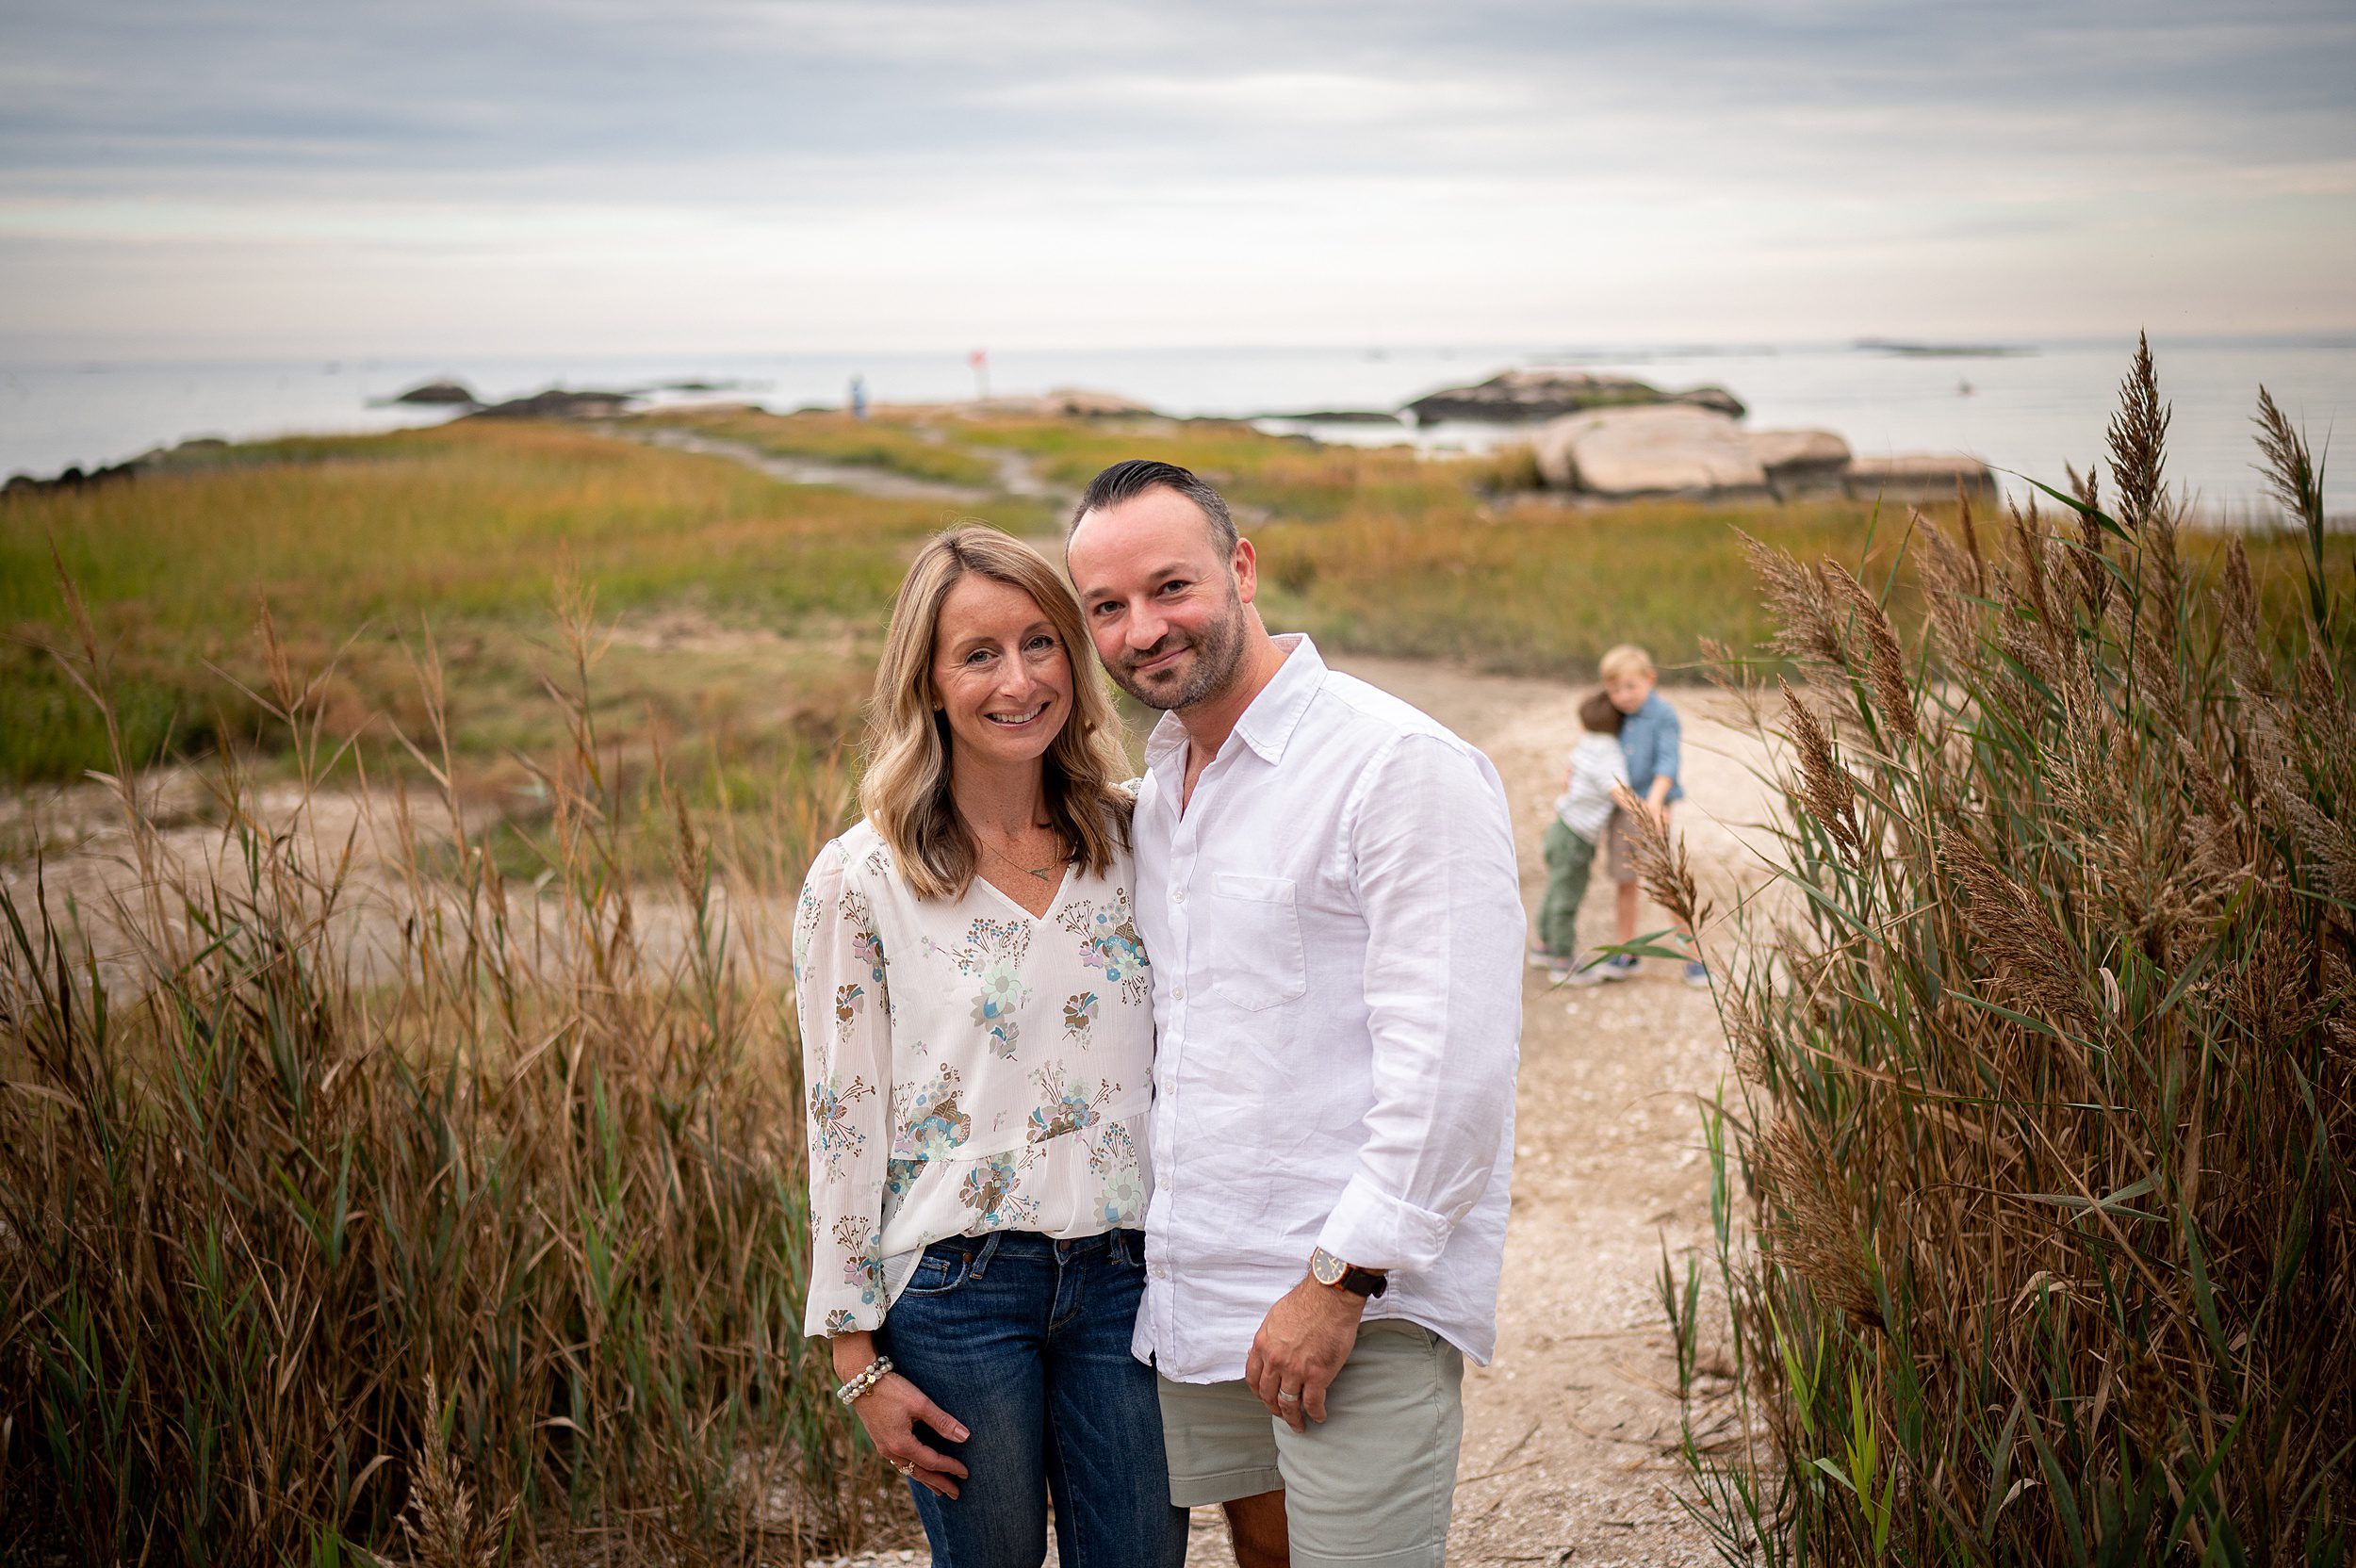 A mother and father smile together while standing in a beach dune path as their two young sons play behind them on the beach after going to a preschool in Madison CT